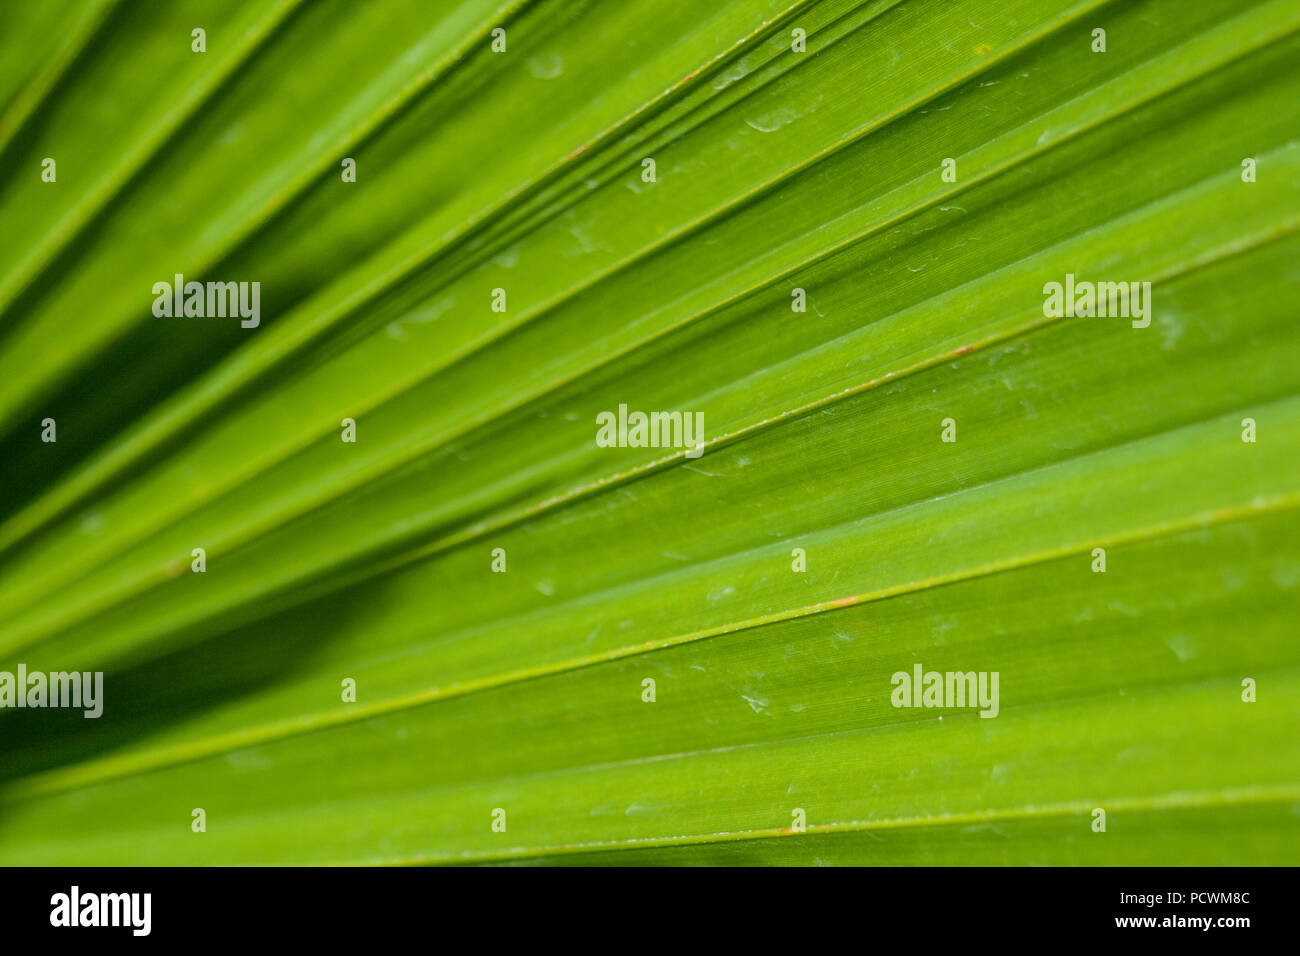 more diffrent plants pattern and wallpaper Stock Photo